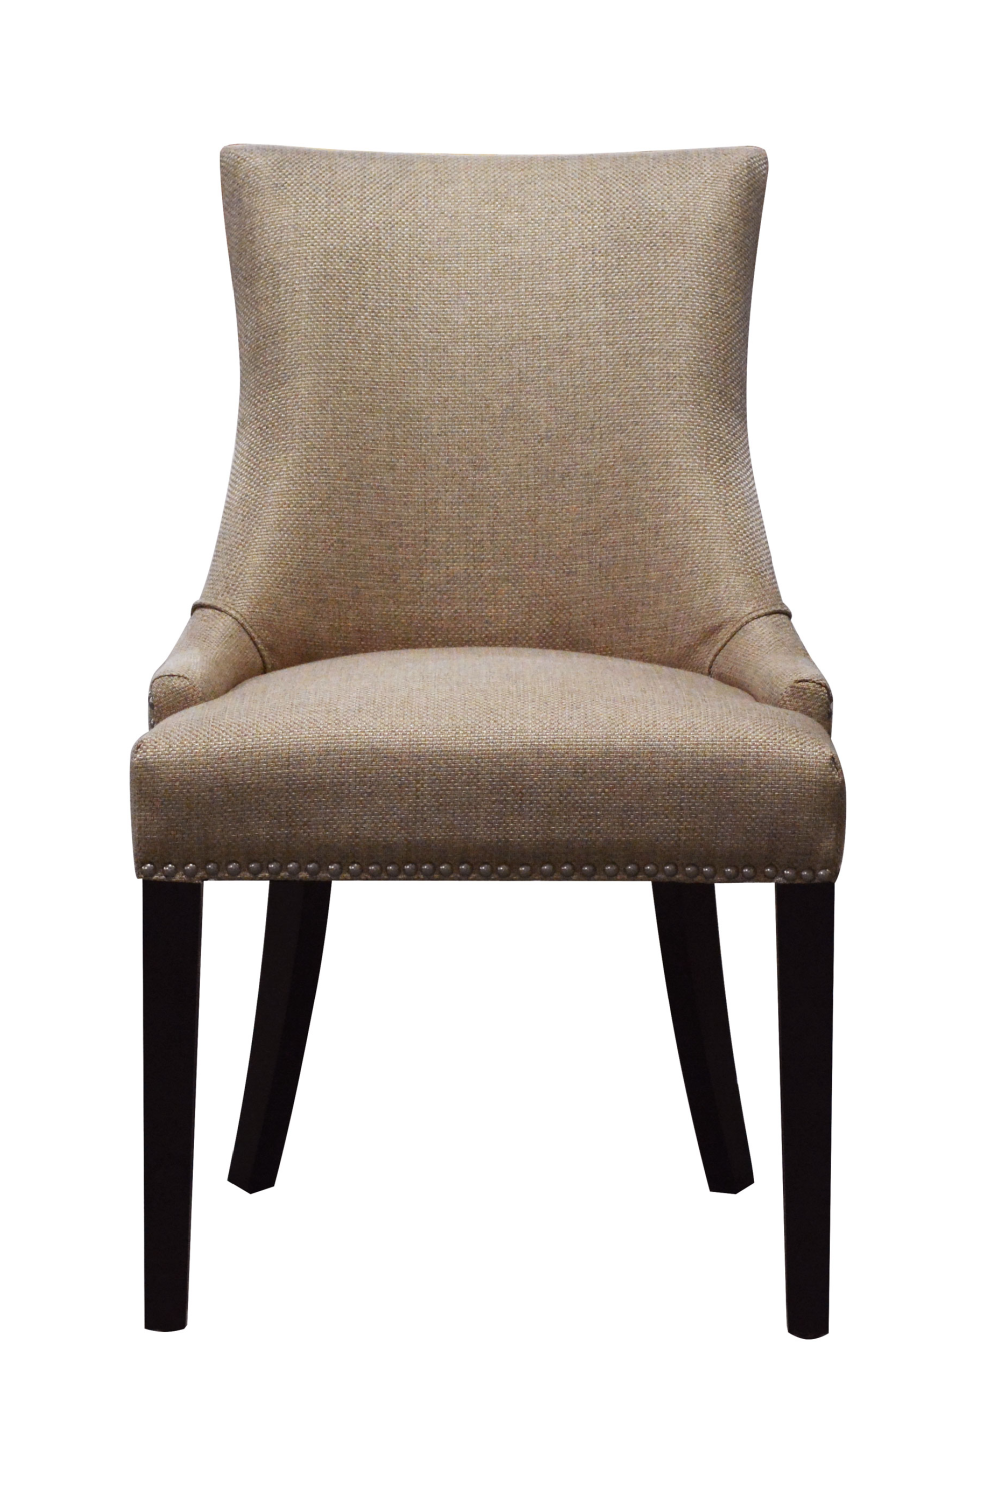 Sand-Colored Scooped Back Dining Chair | Andrew Martin Theodore | OROA